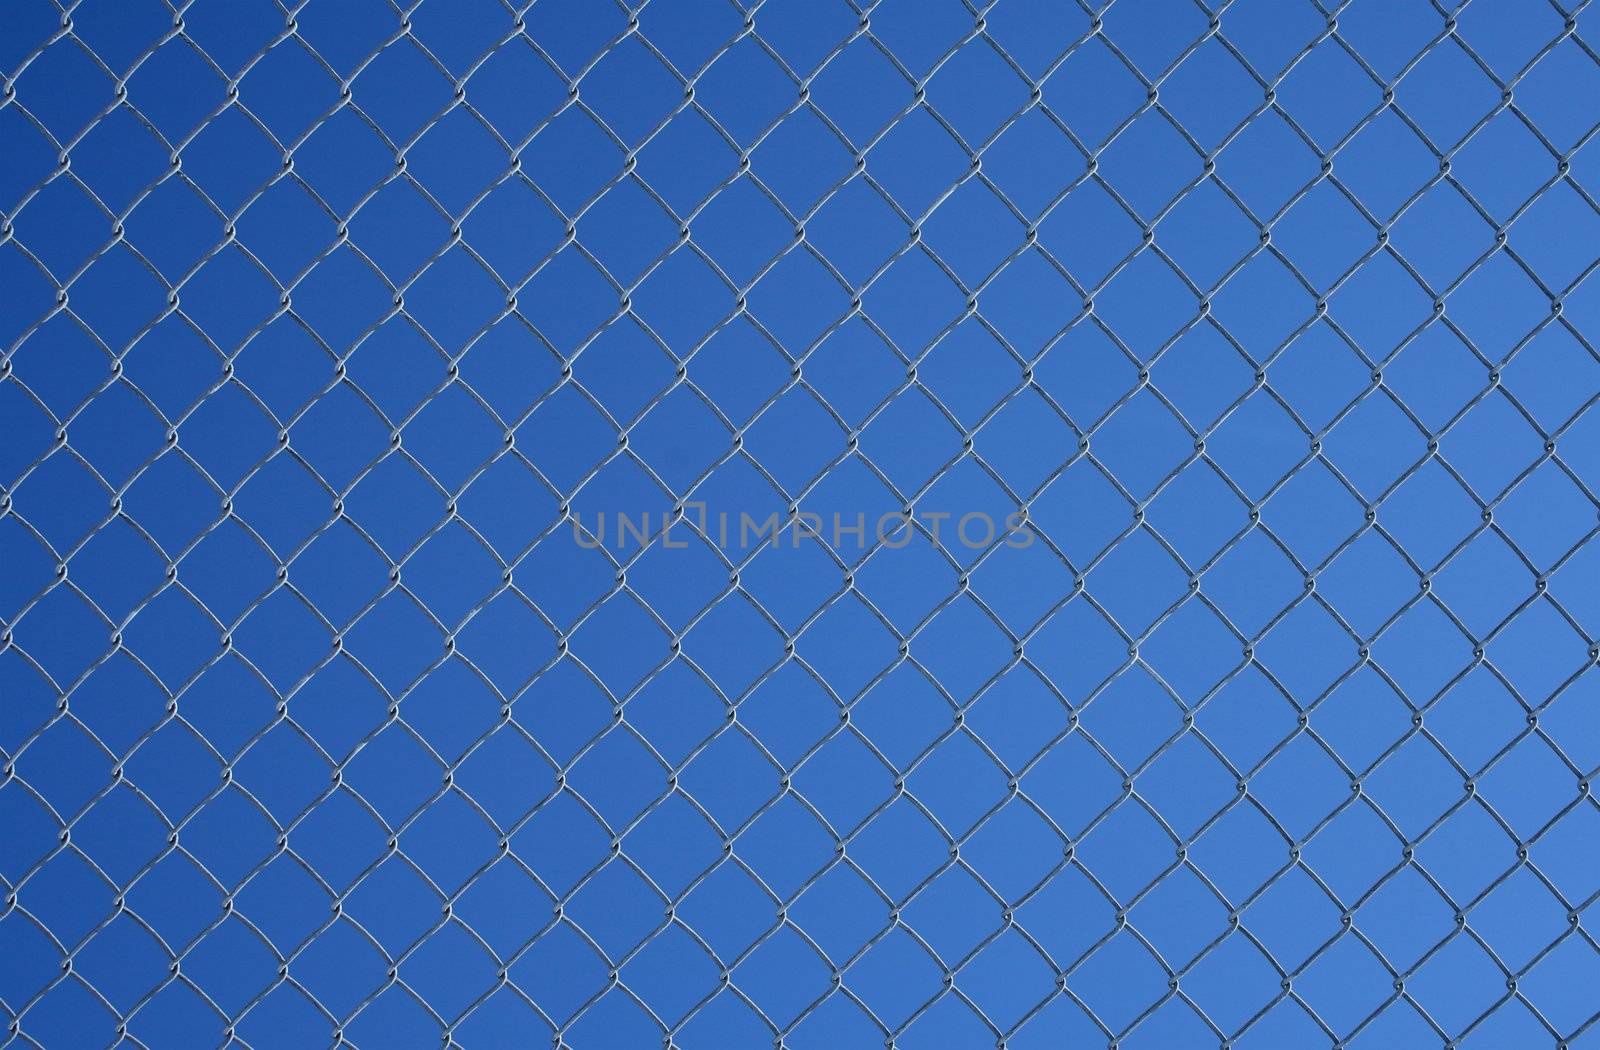 Chain link fence against the blue sky by anikasalsera